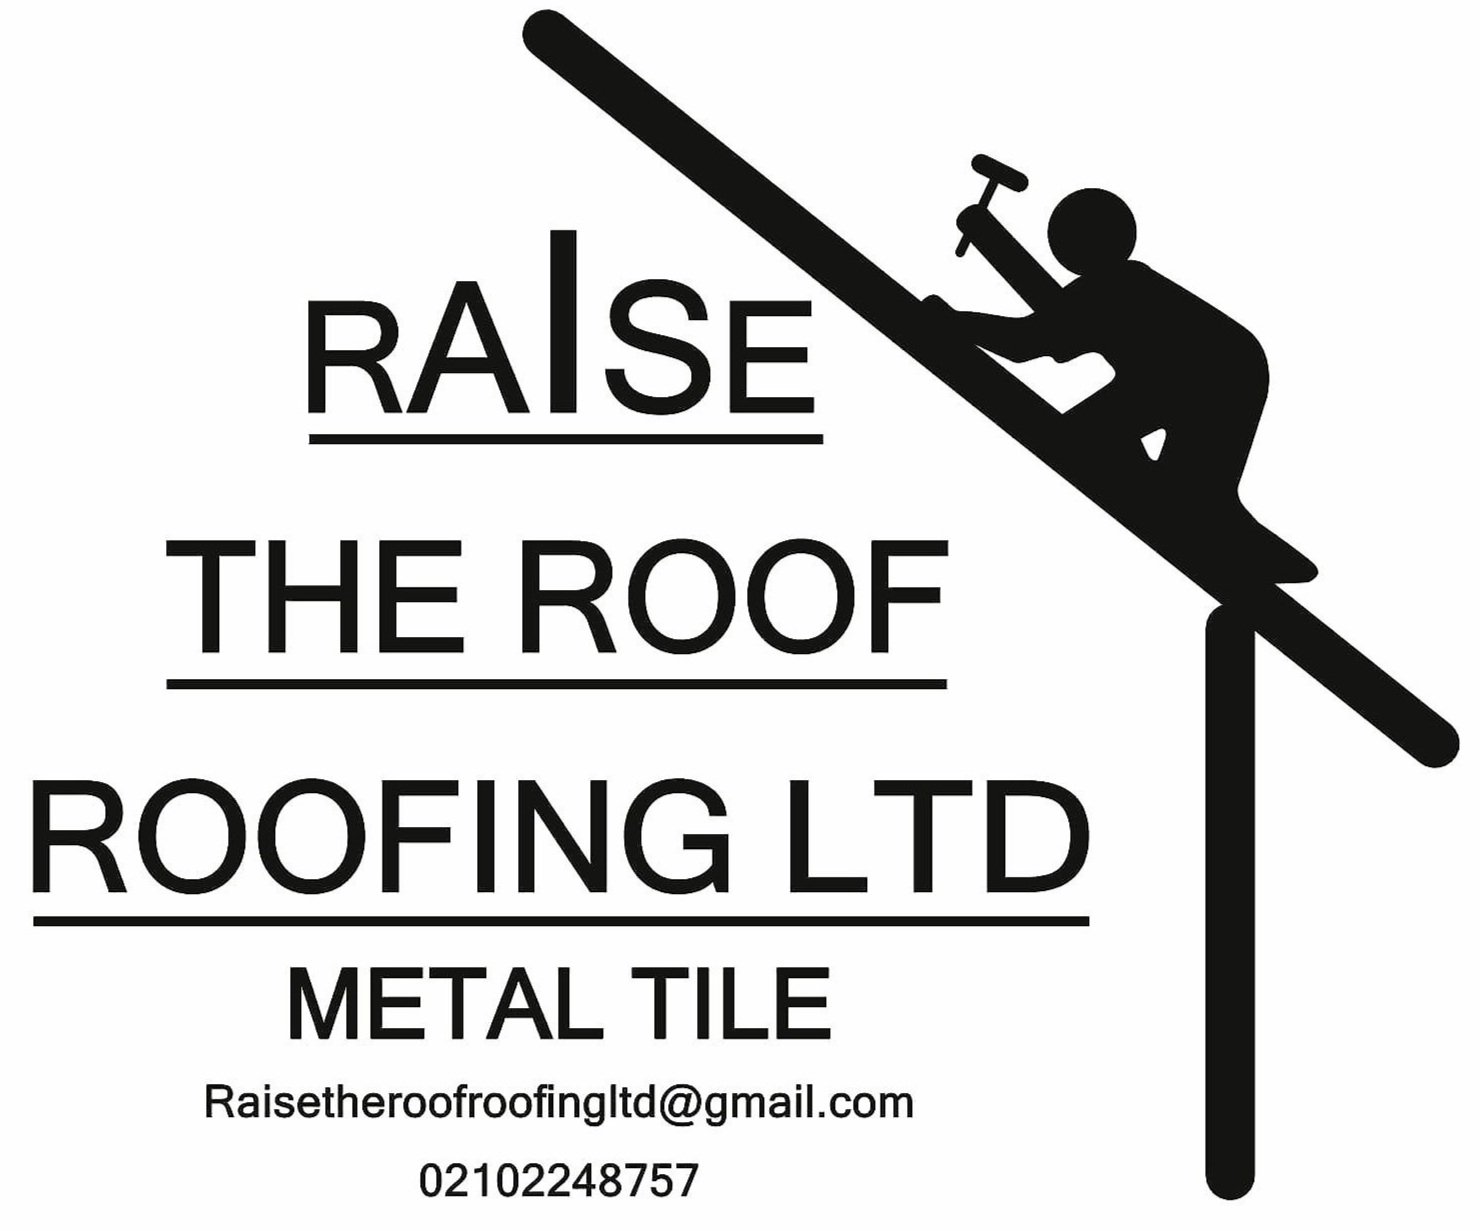 Raise the Roof Roofing Ltd